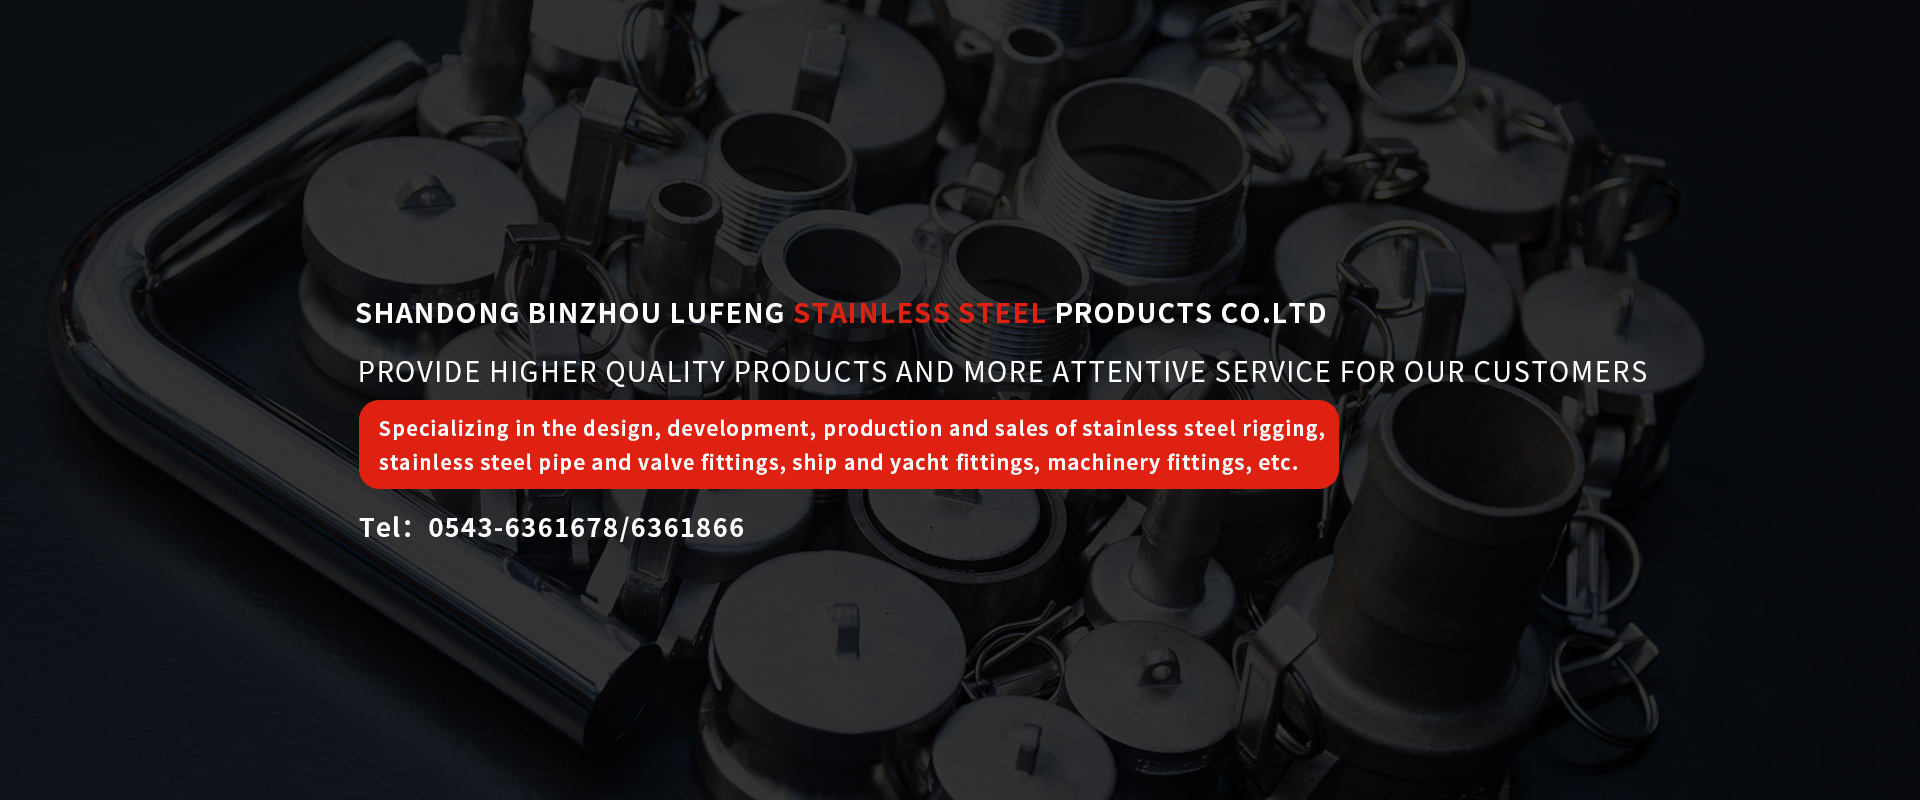 Shandong Binzhou Lufeng Stainless Steel Products Co.Ltd